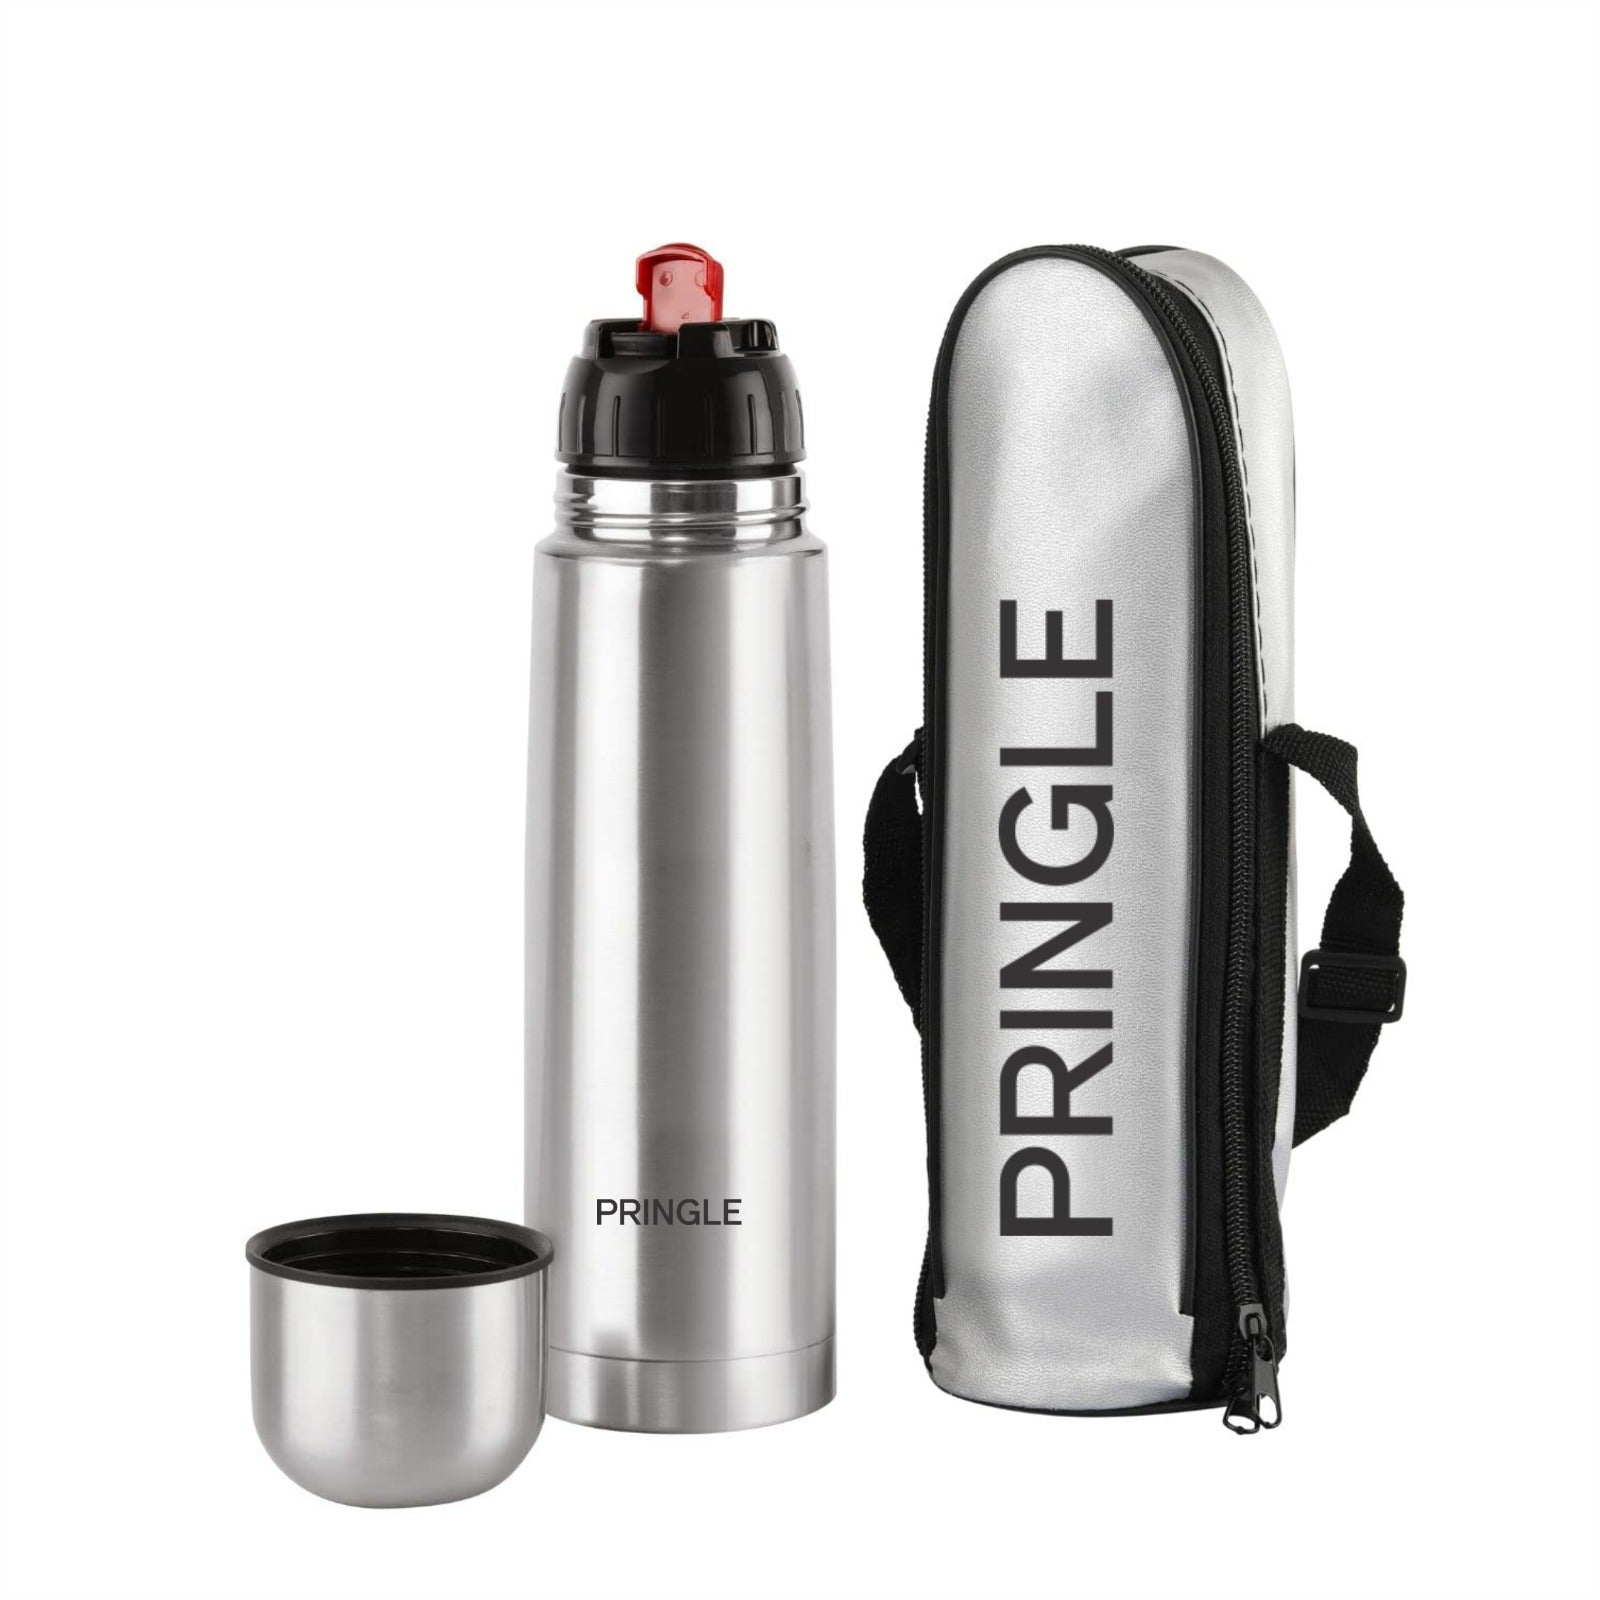 Pringle Flipstyle Stainless Steel Vacuum Insulated Flask with Jacket 750ml | Hot and Cold Water Bottle with Flip lid | Double Walled Silver Bottle for Home, Office, Travel - Pringle Appliances